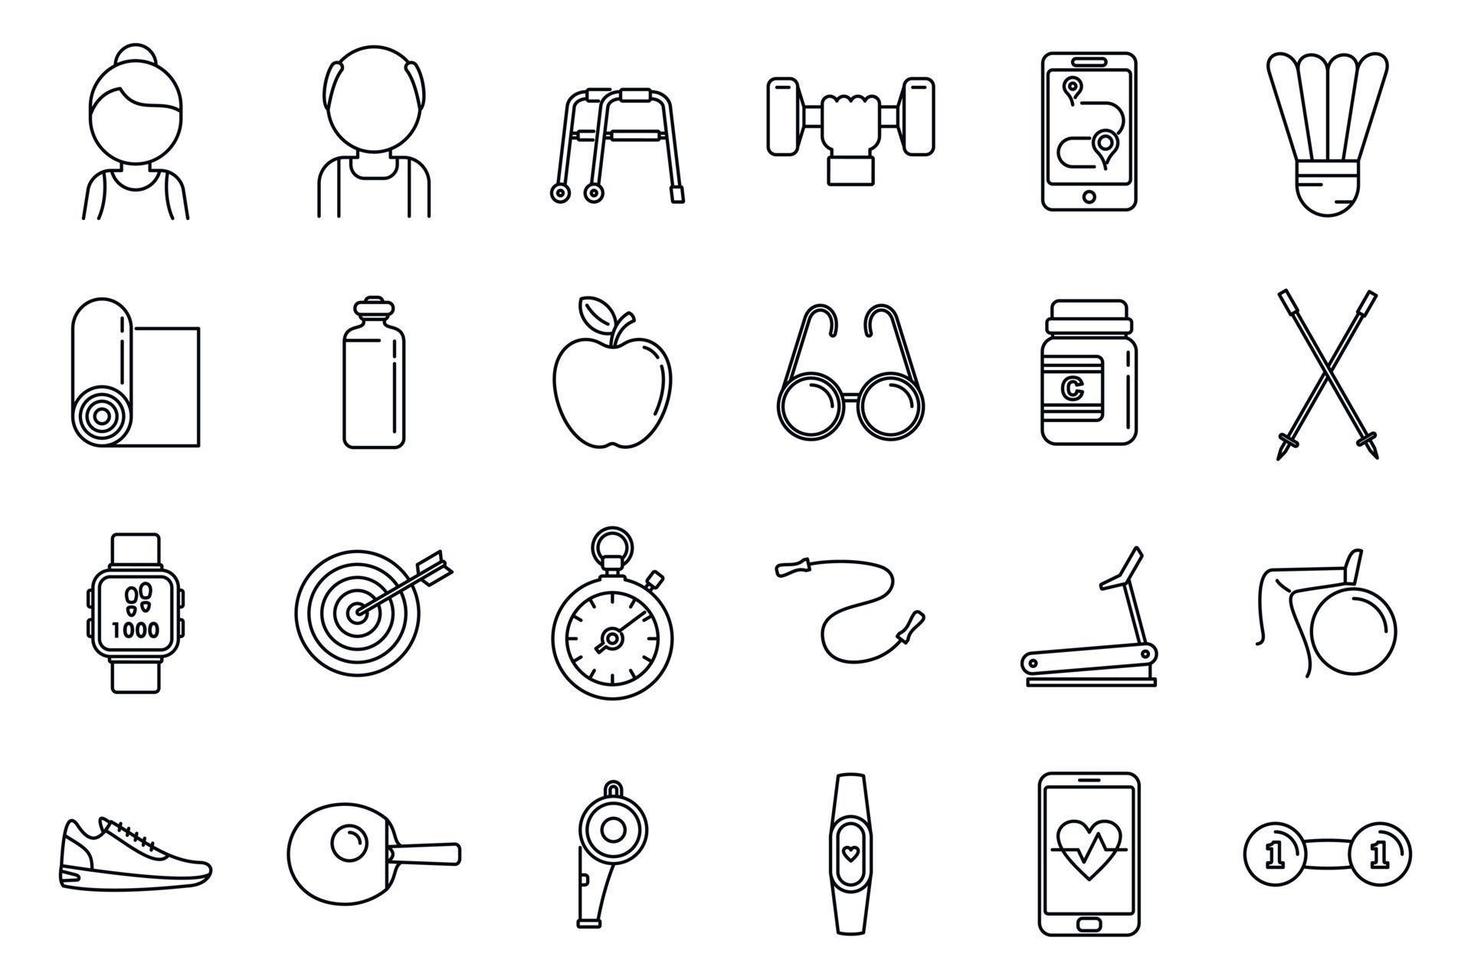 Workout seniors activity icons set, outline style vector